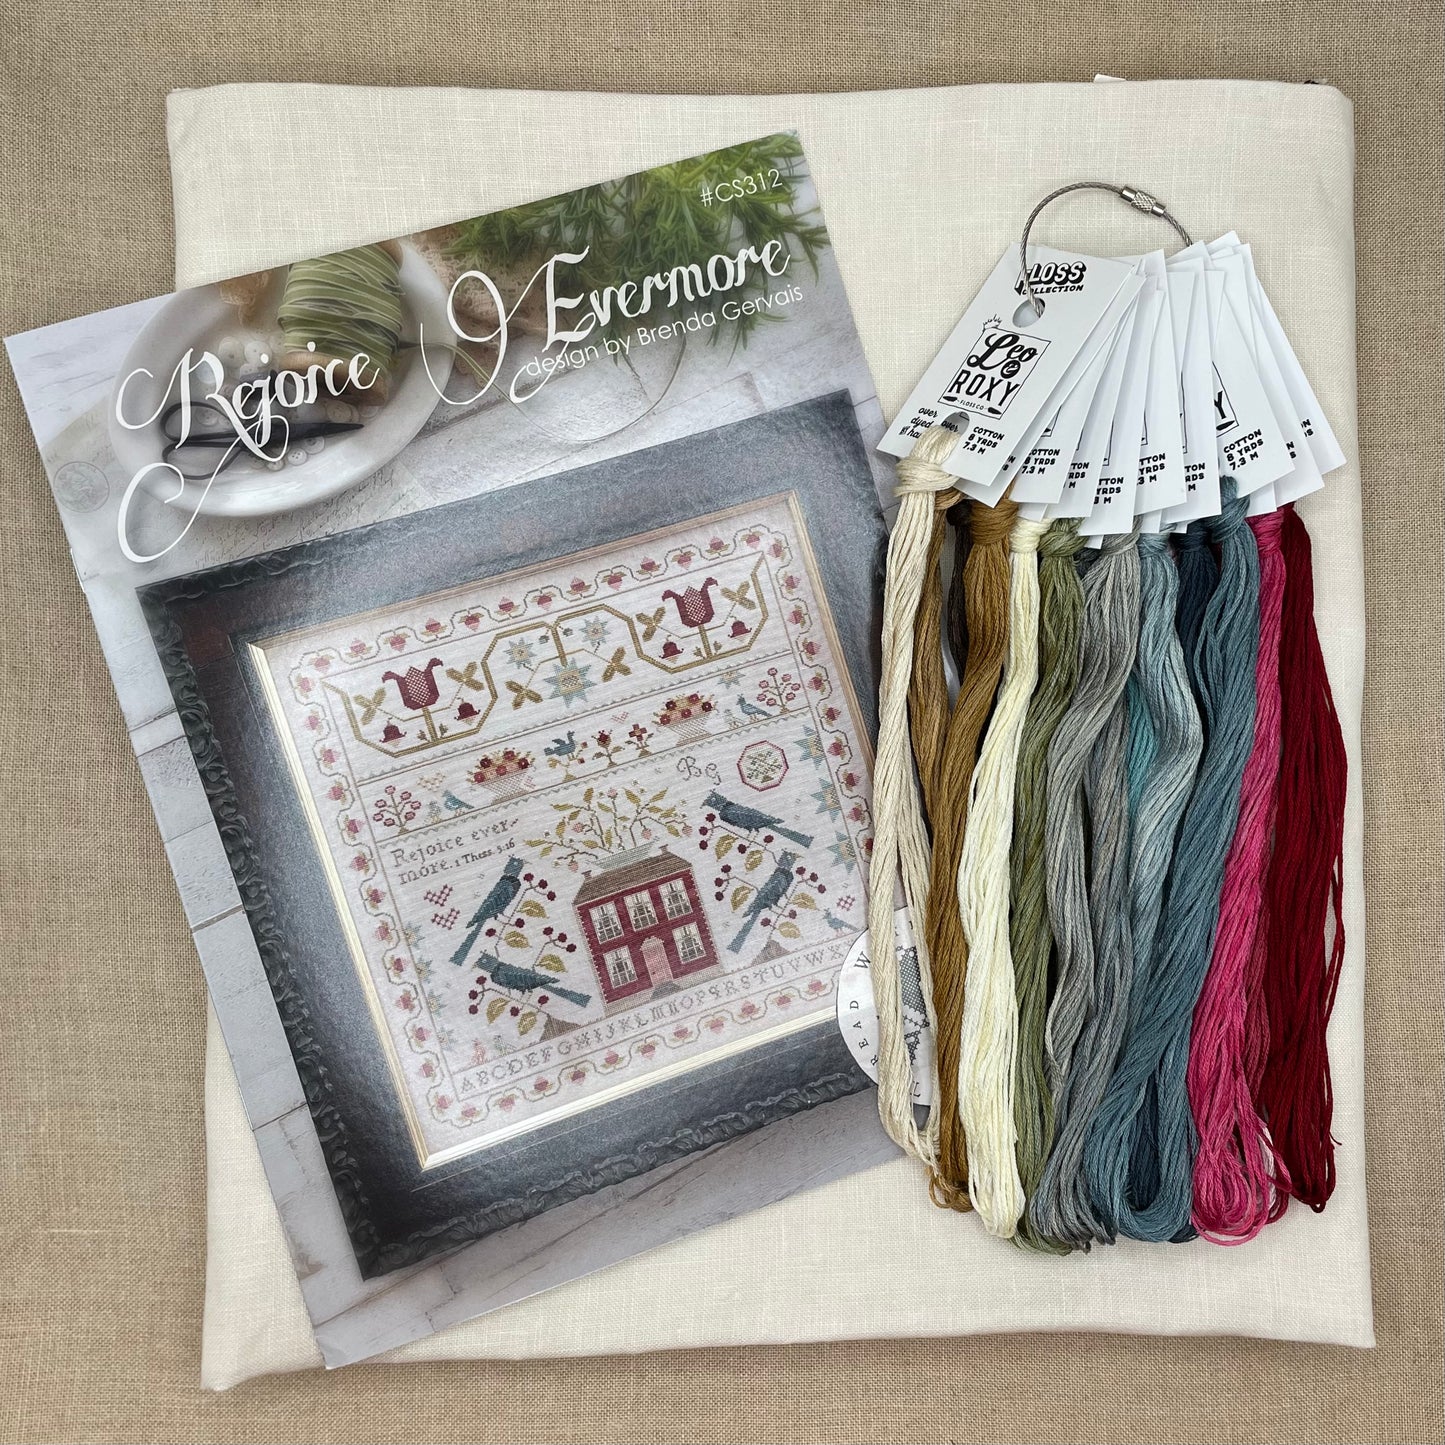 WITH THY NEEDLE AND THREAD - Rejoice Evermore Roxy Floss Co. Conversion by Ellen Reid